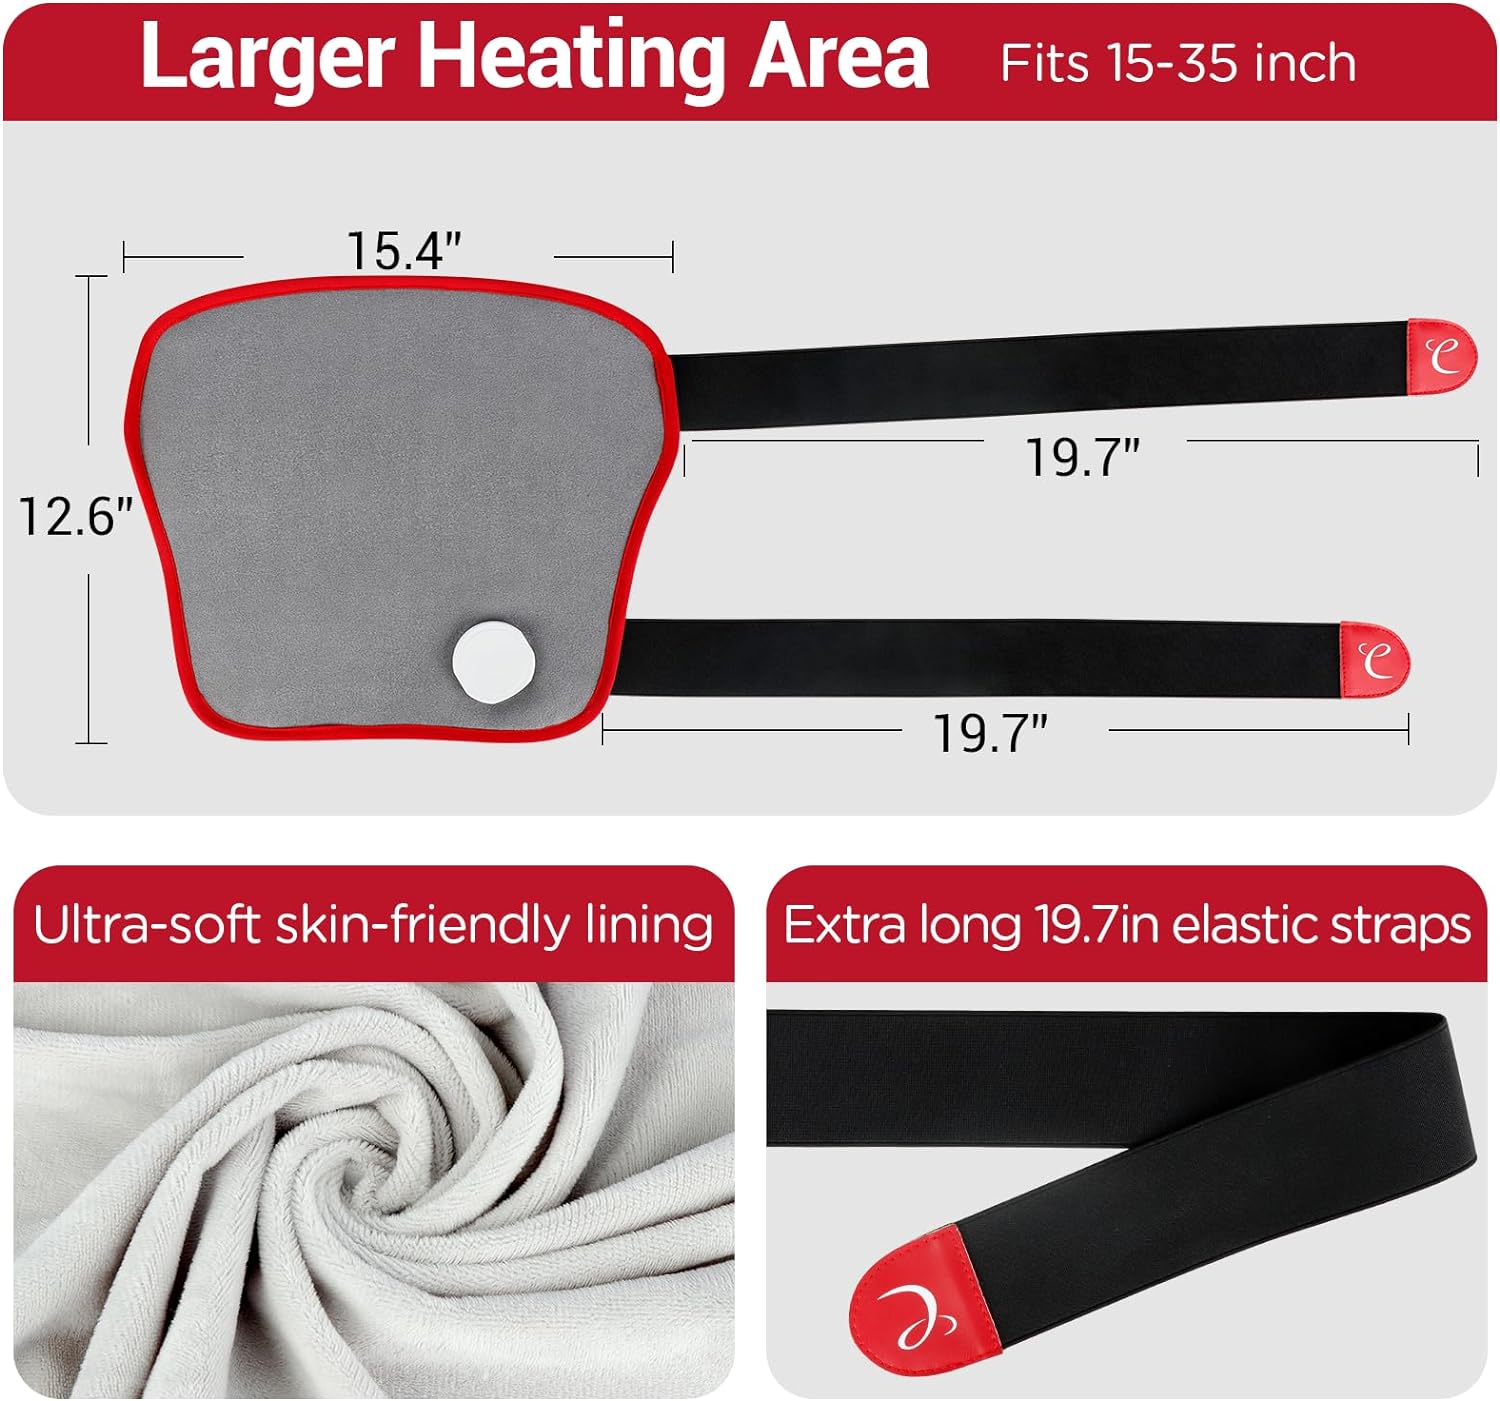 Comfytemp Leg Heating Pad for Pain Relief